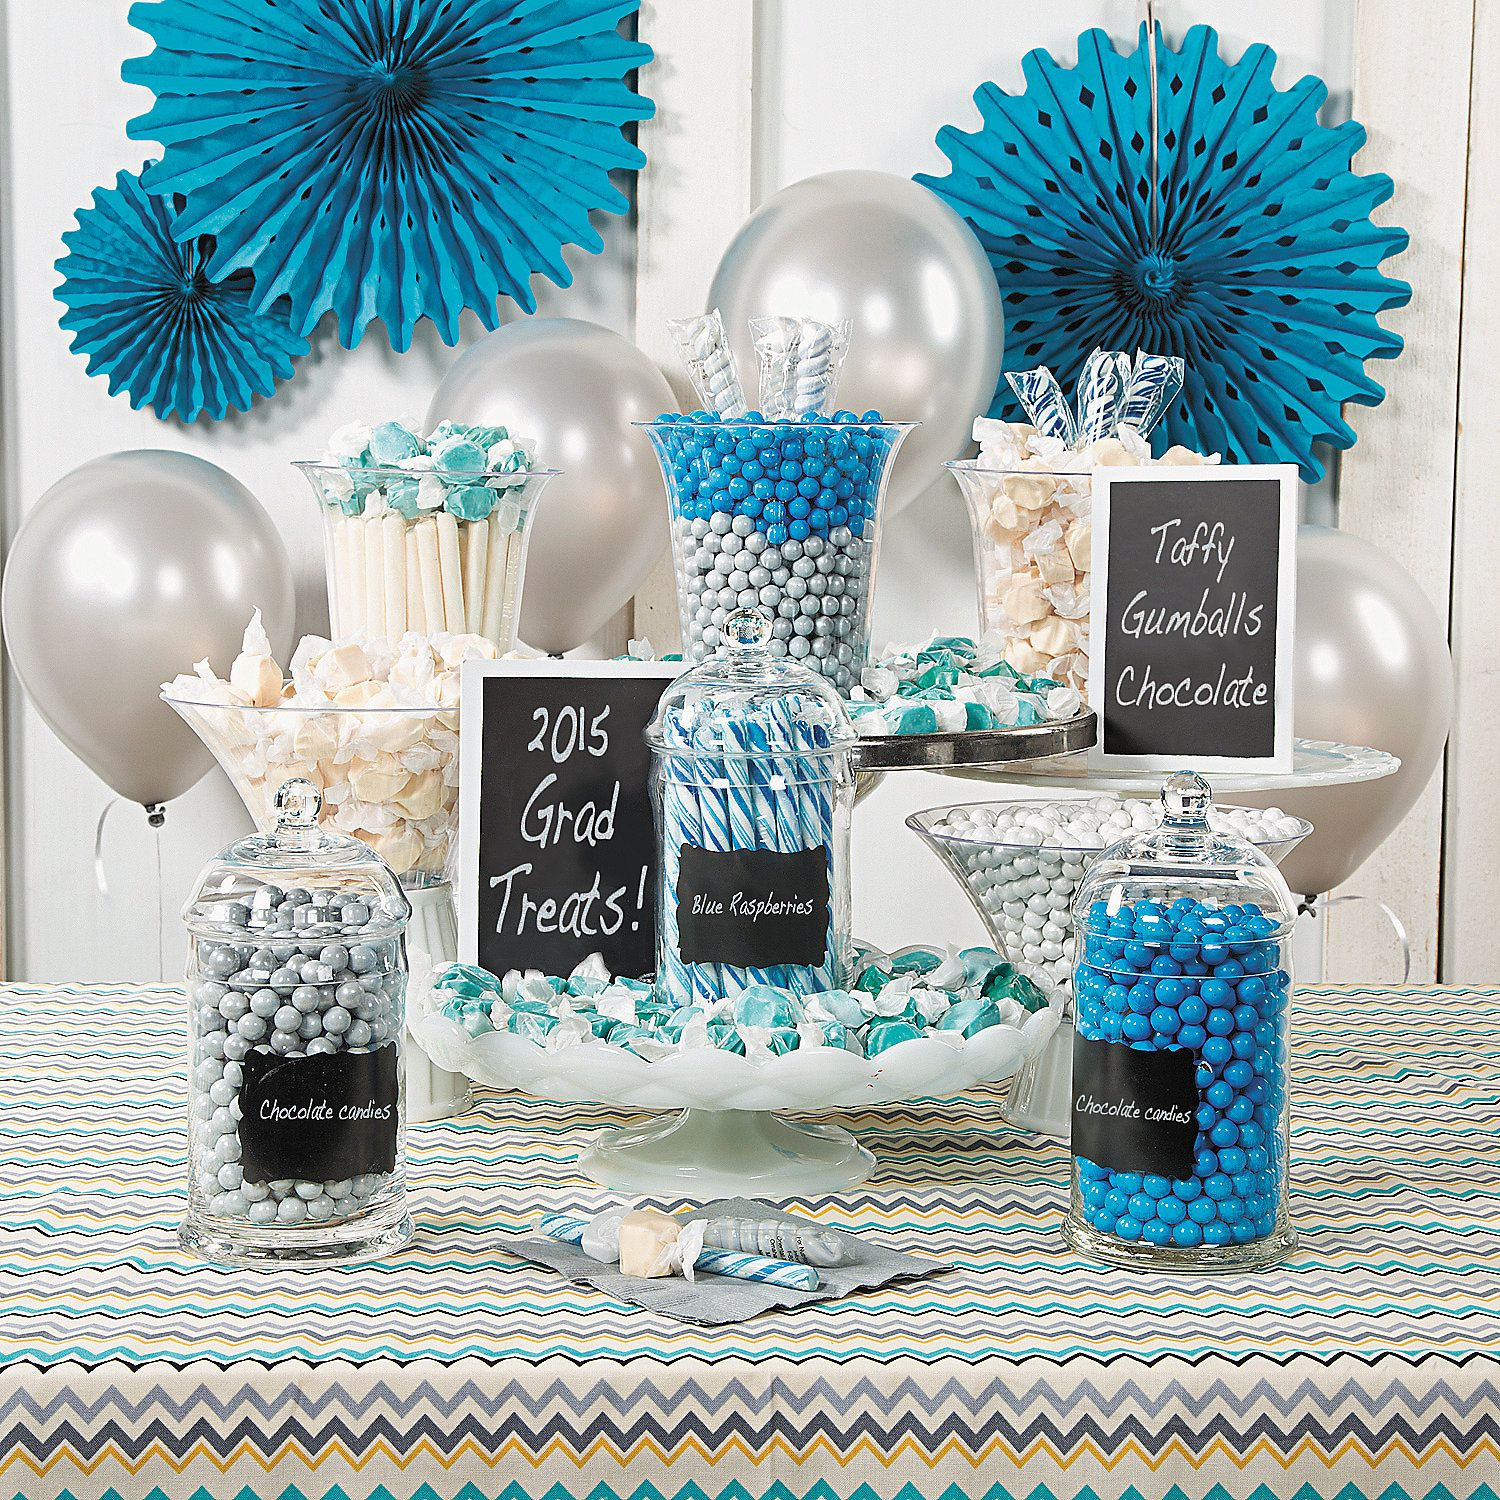 Candy Buffet Ideas For Graduation Party
 Blue & White Graduation Candy Buffet Idea